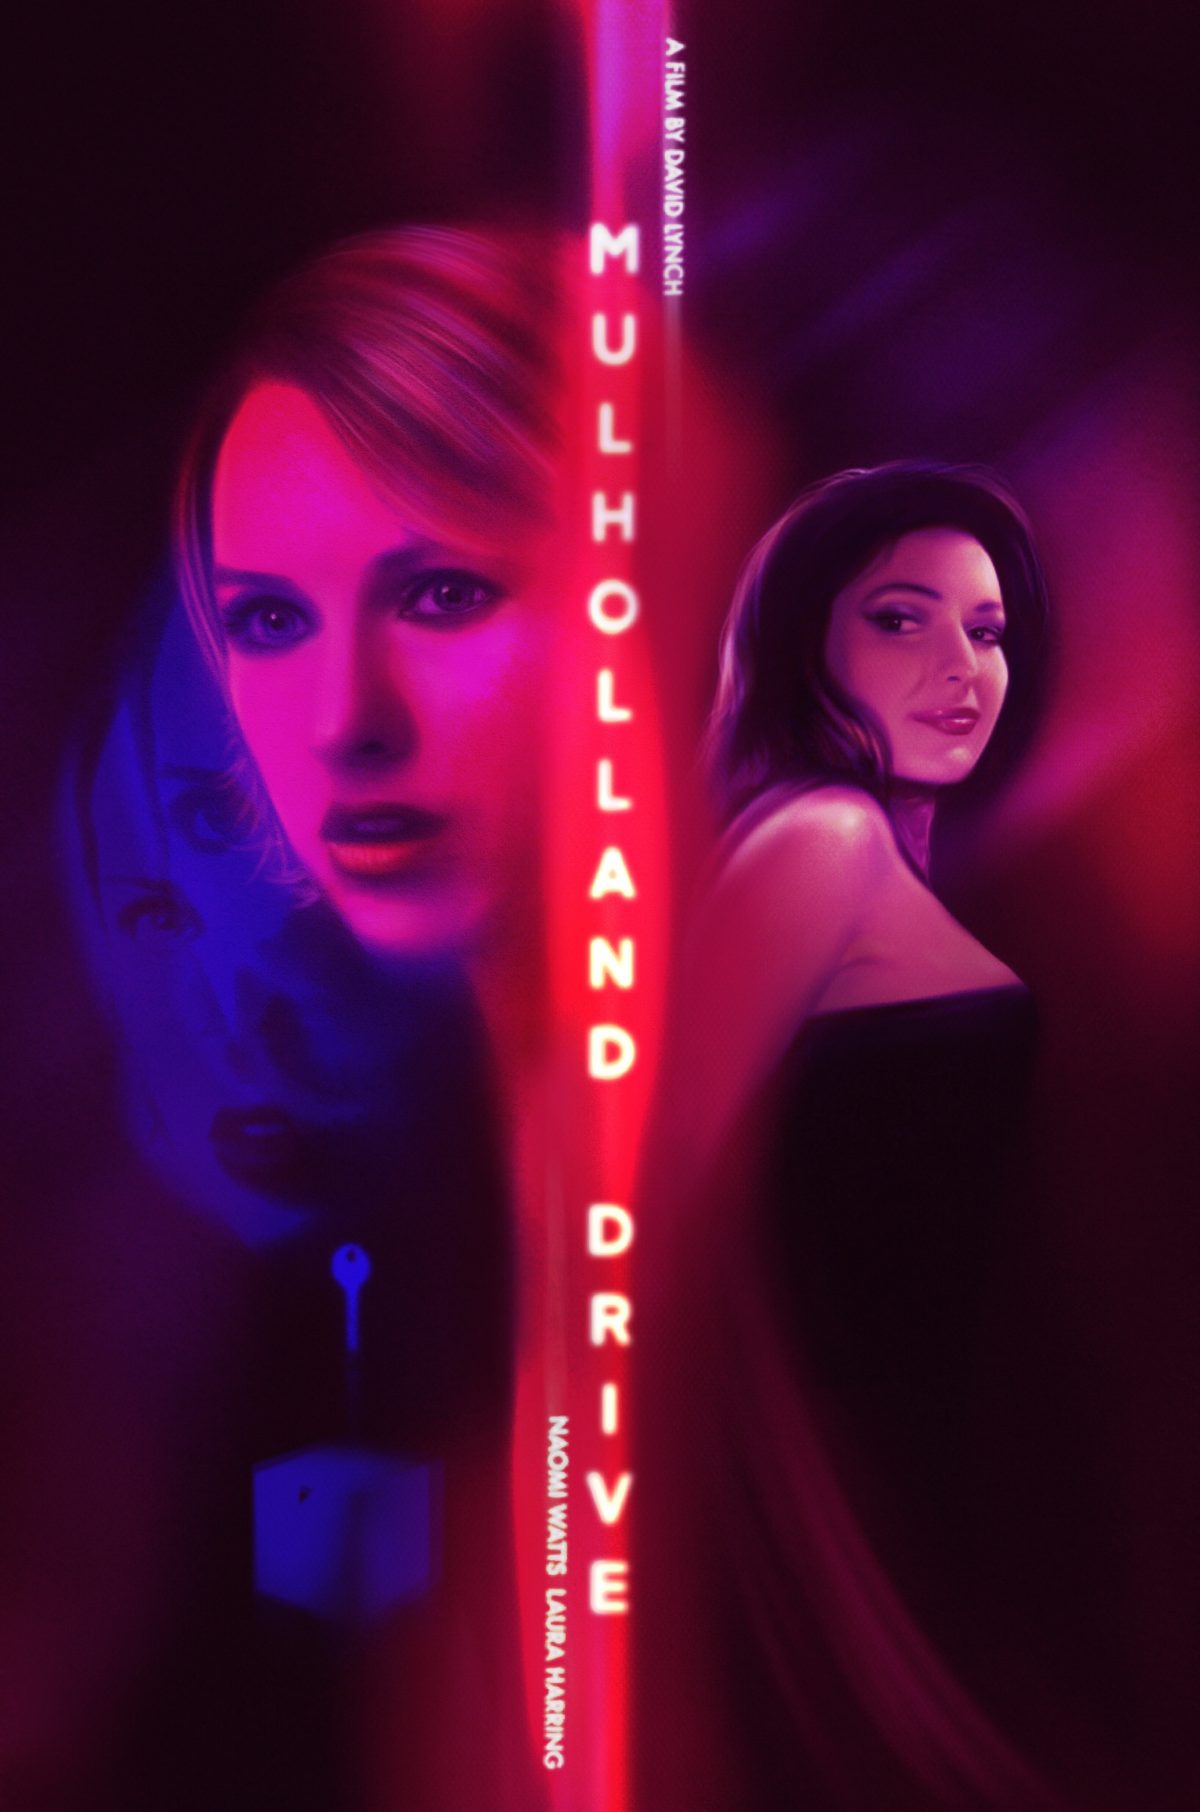 songs in mulholland drive